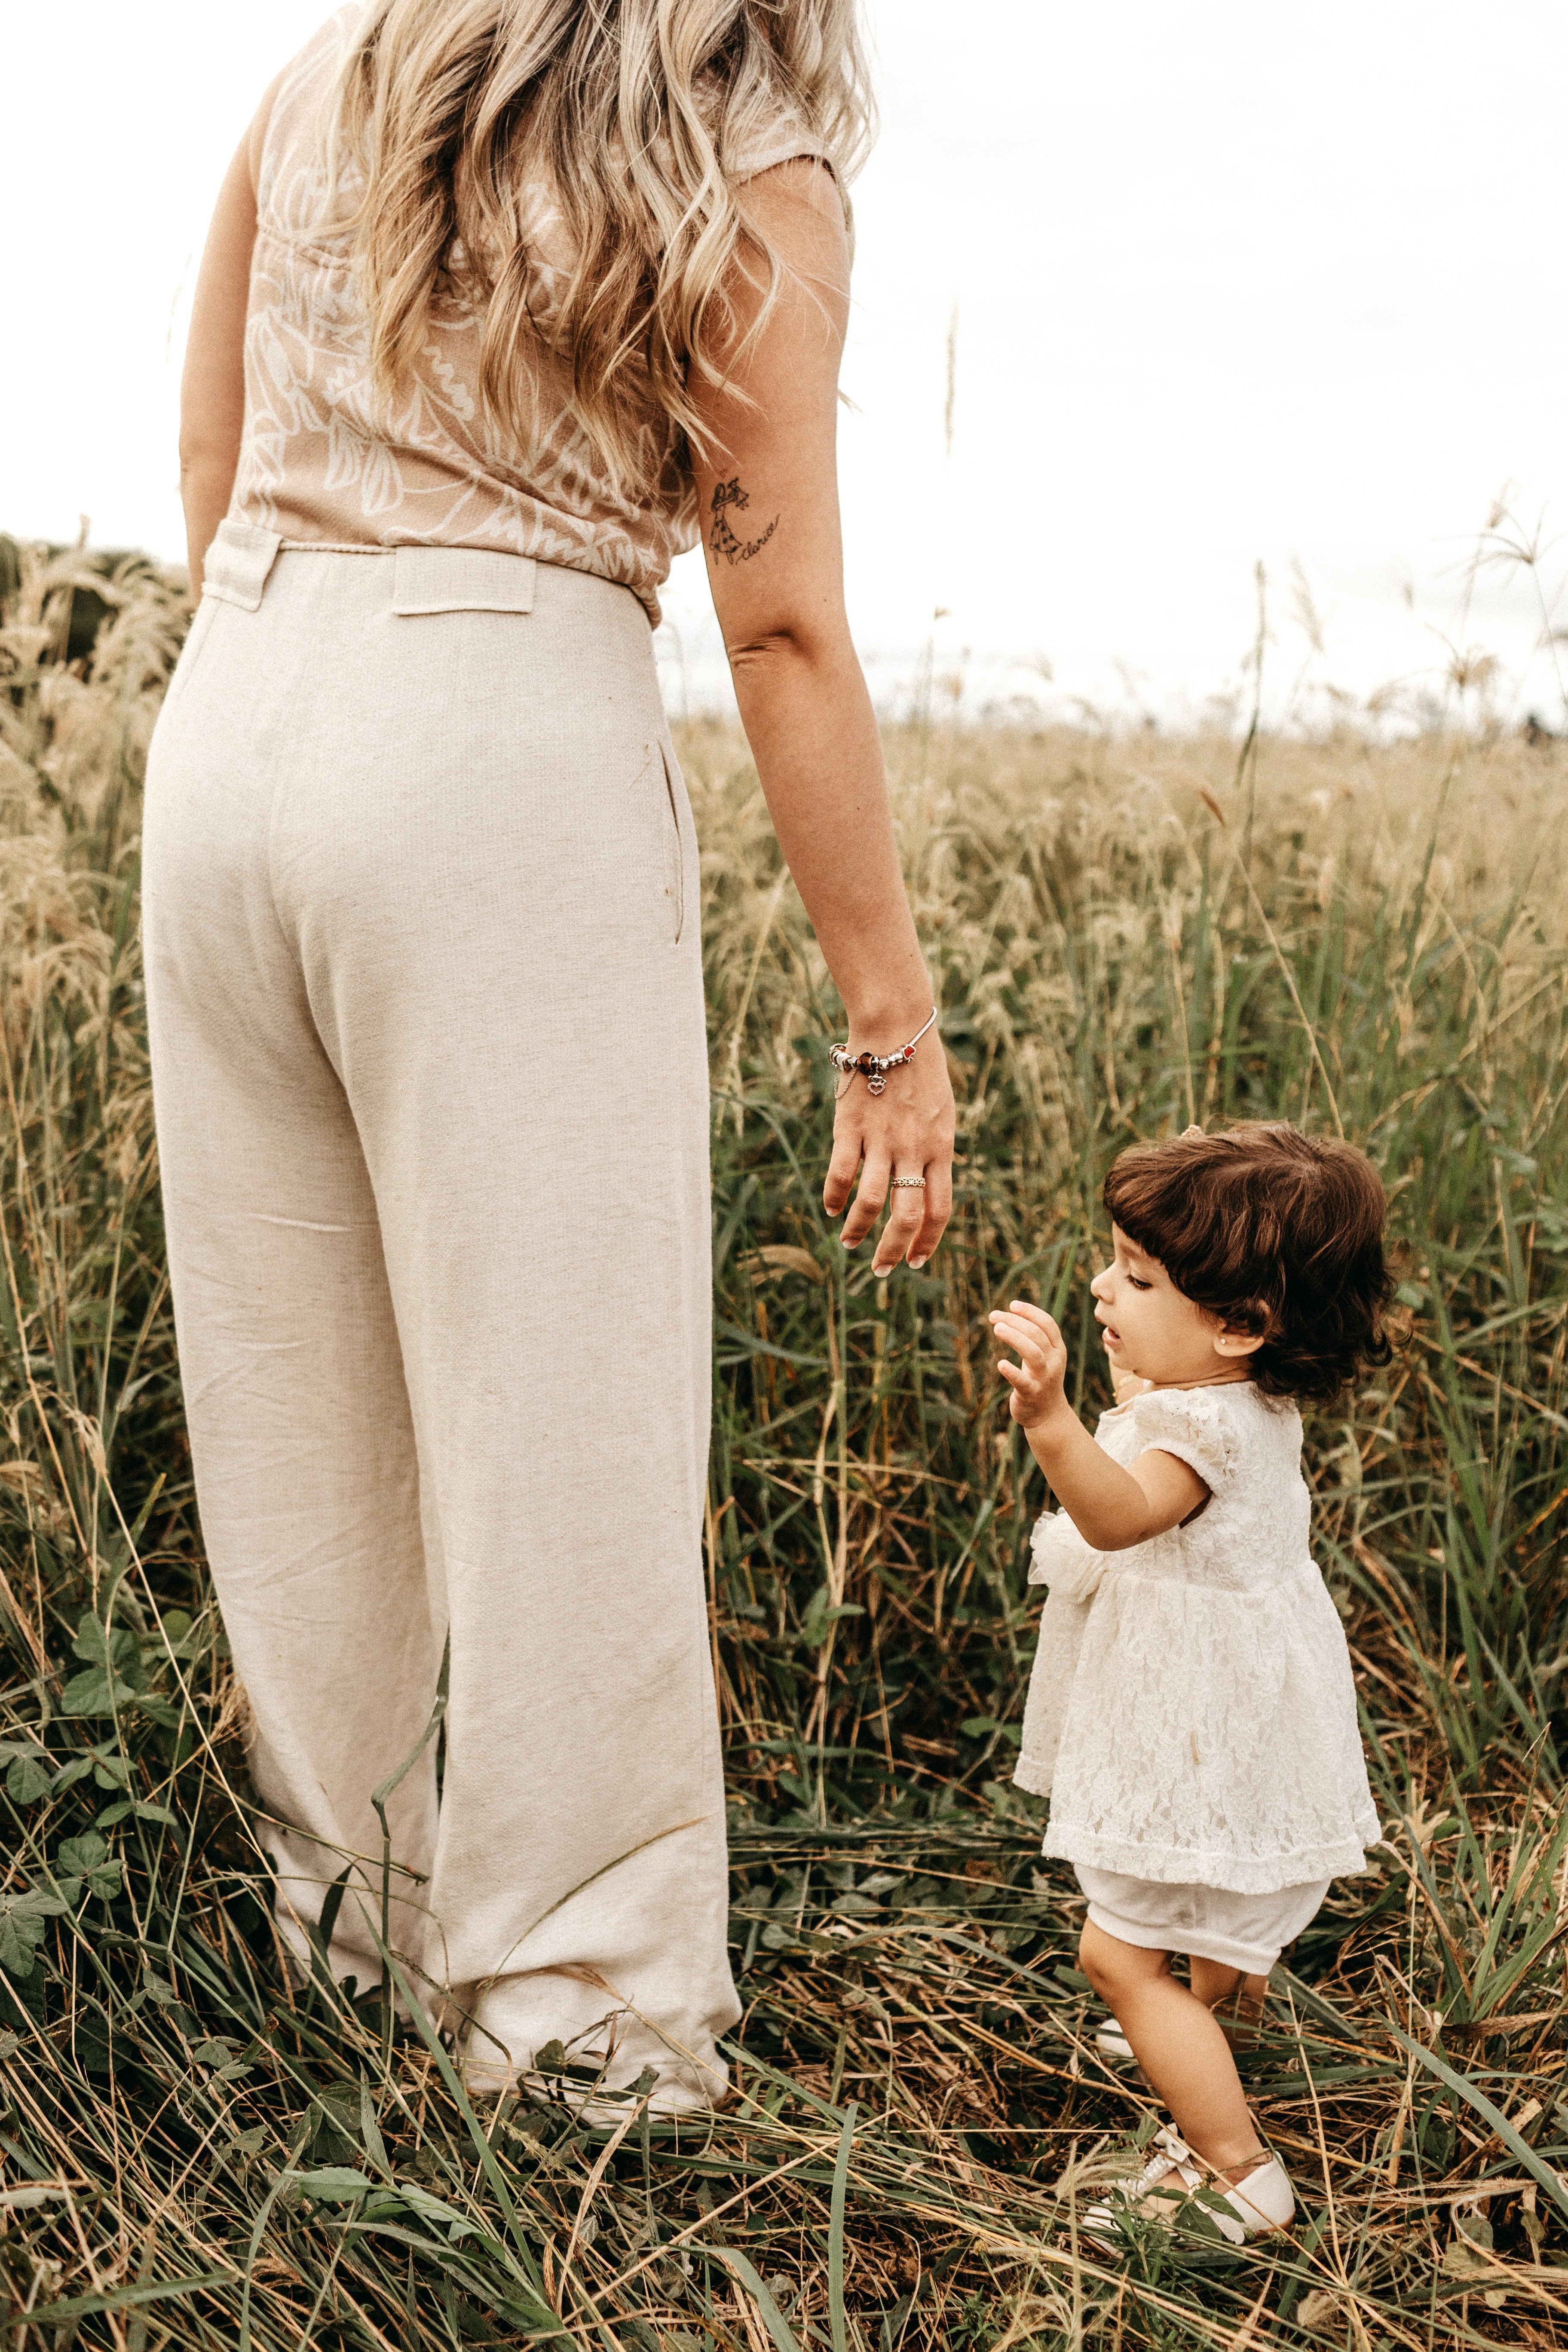 Woman and little girl | Source: Unsplash